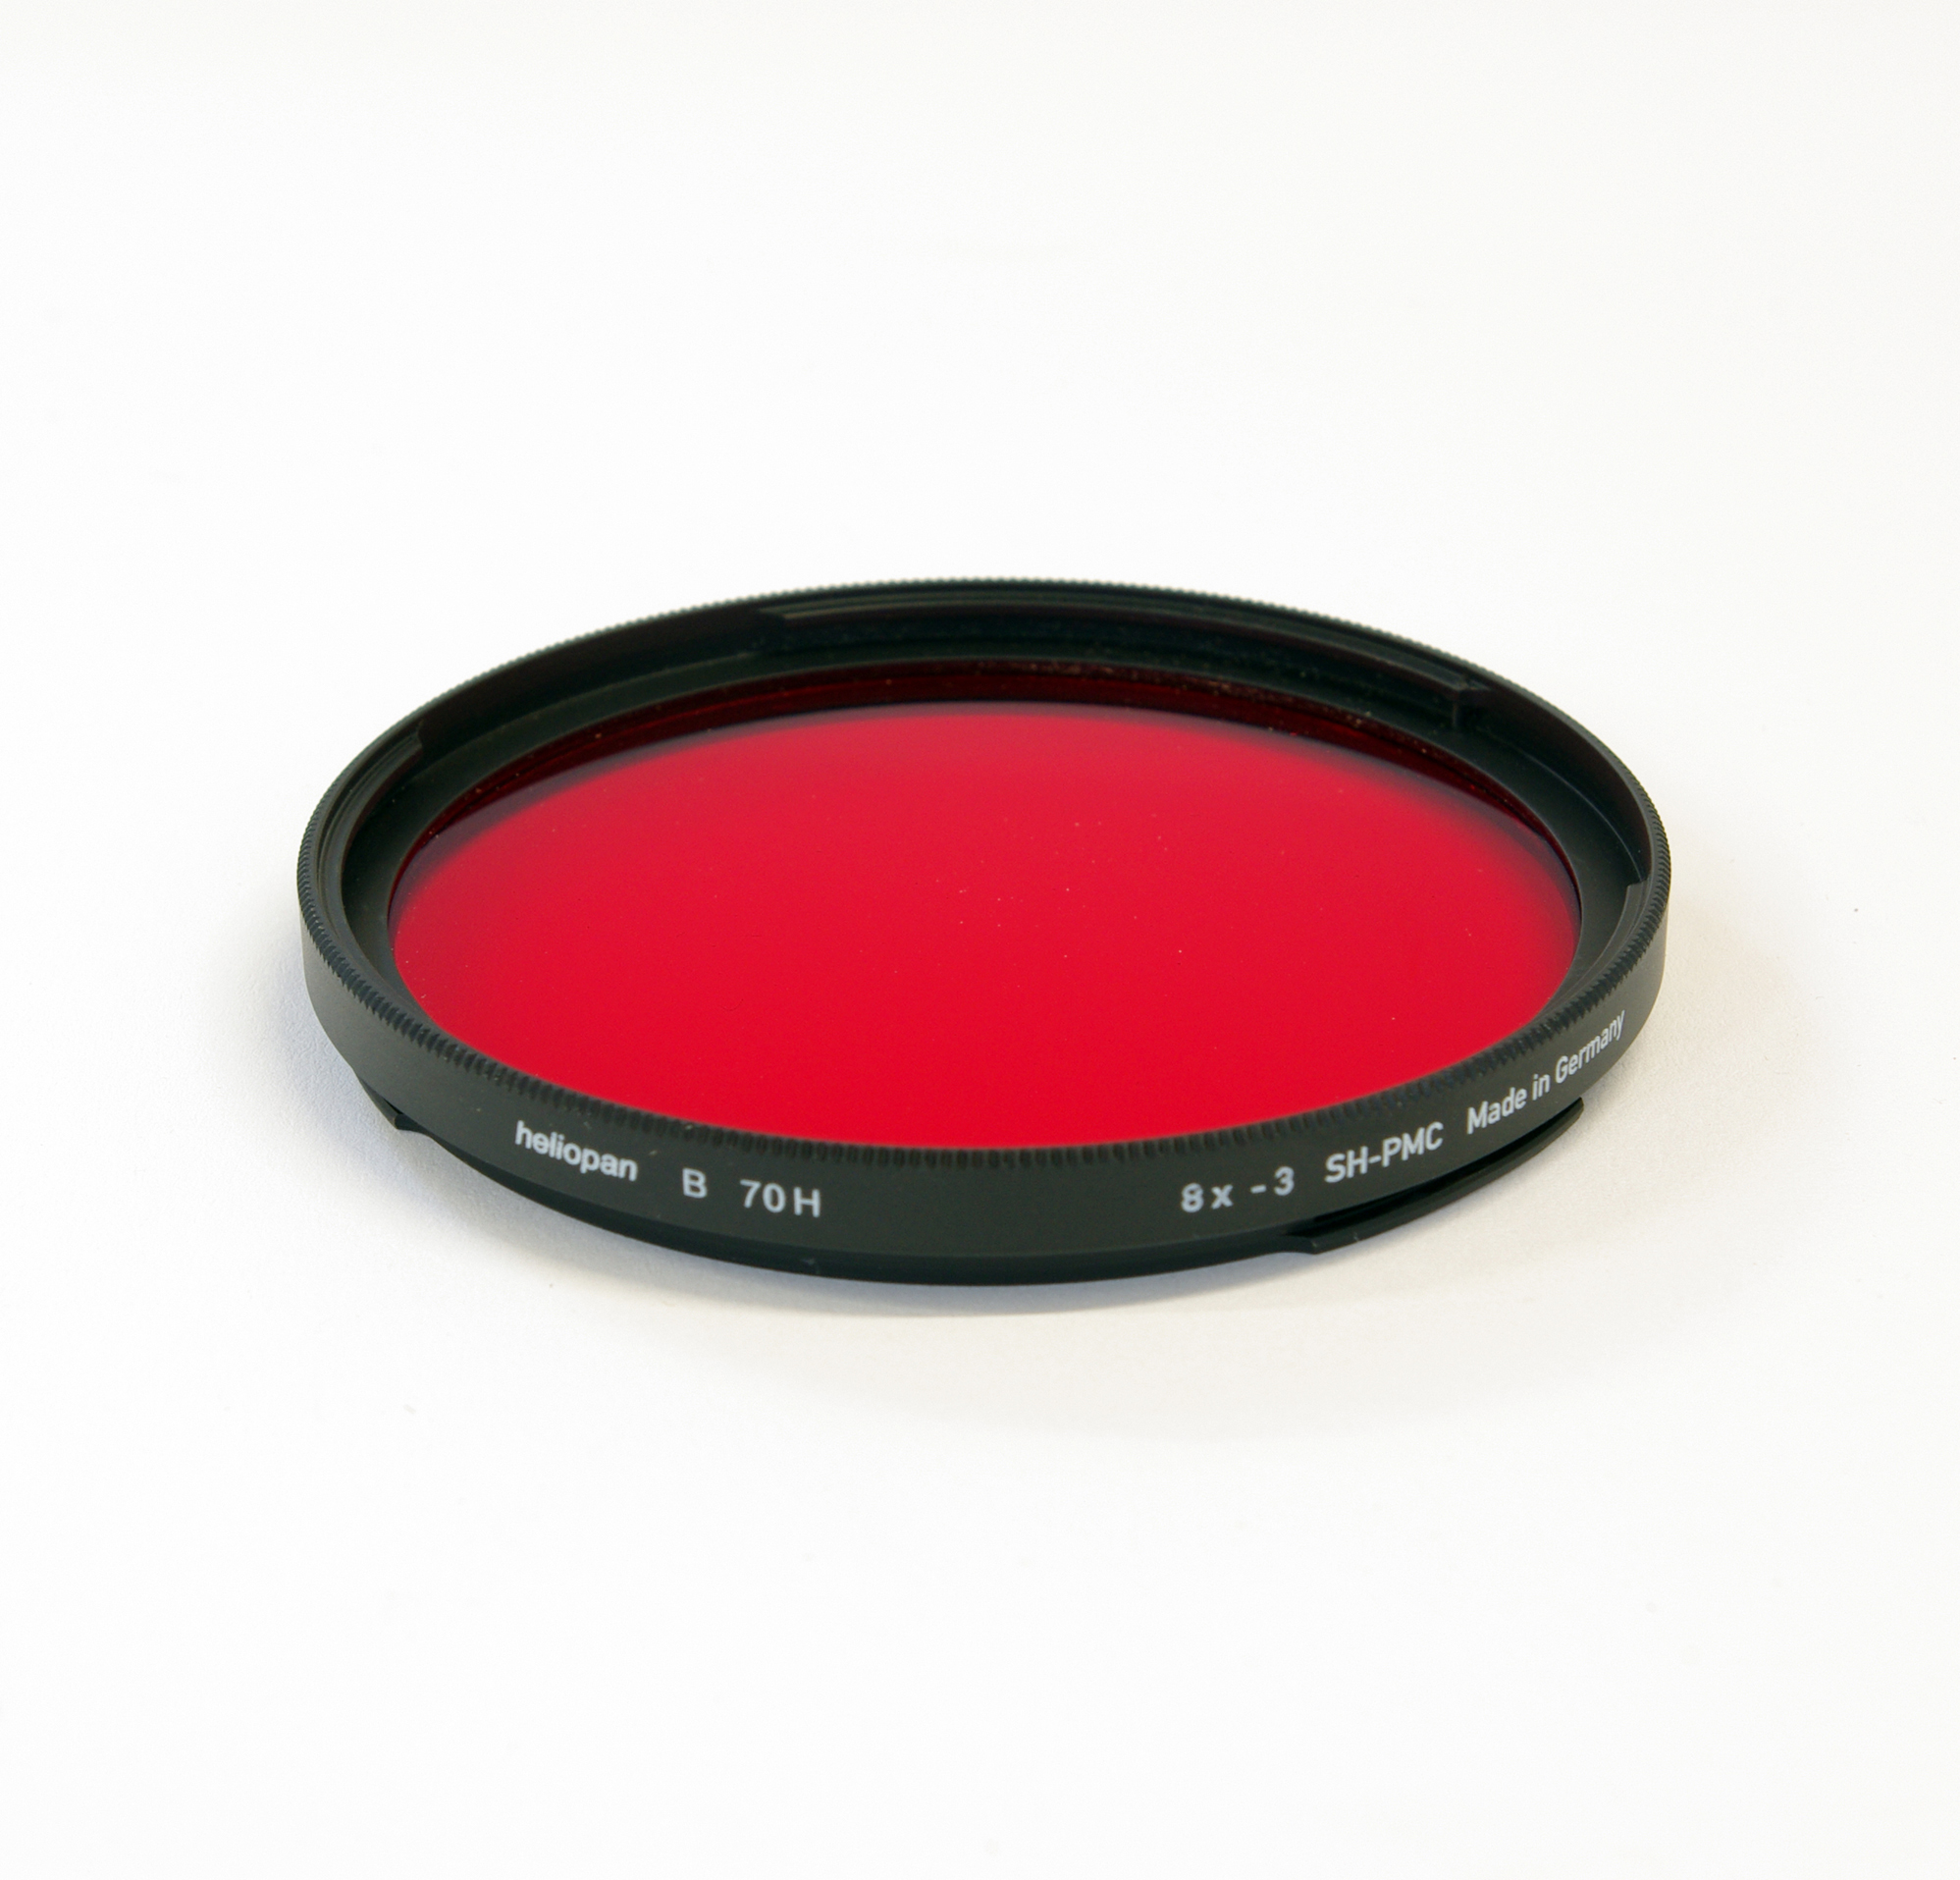 Heliopan sh-pmc multi coated red 25 filter. hasselblad bay60/bay70